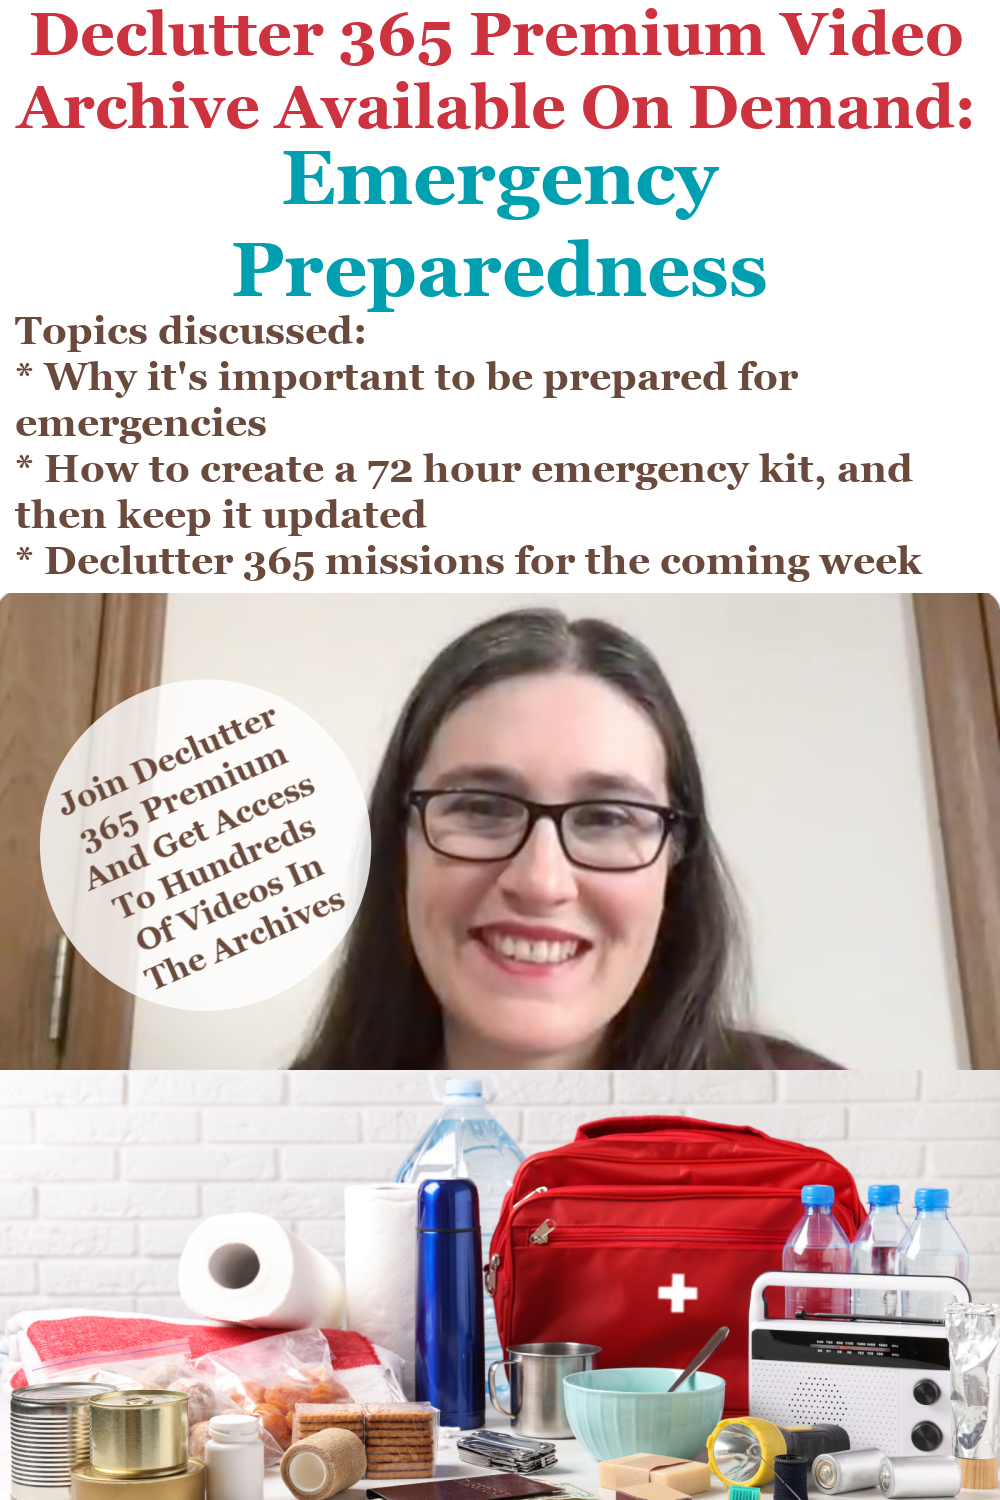 Declutter 365 Premium video archive available on demand all about emergency preparedness, on Home Storage Solutions 101